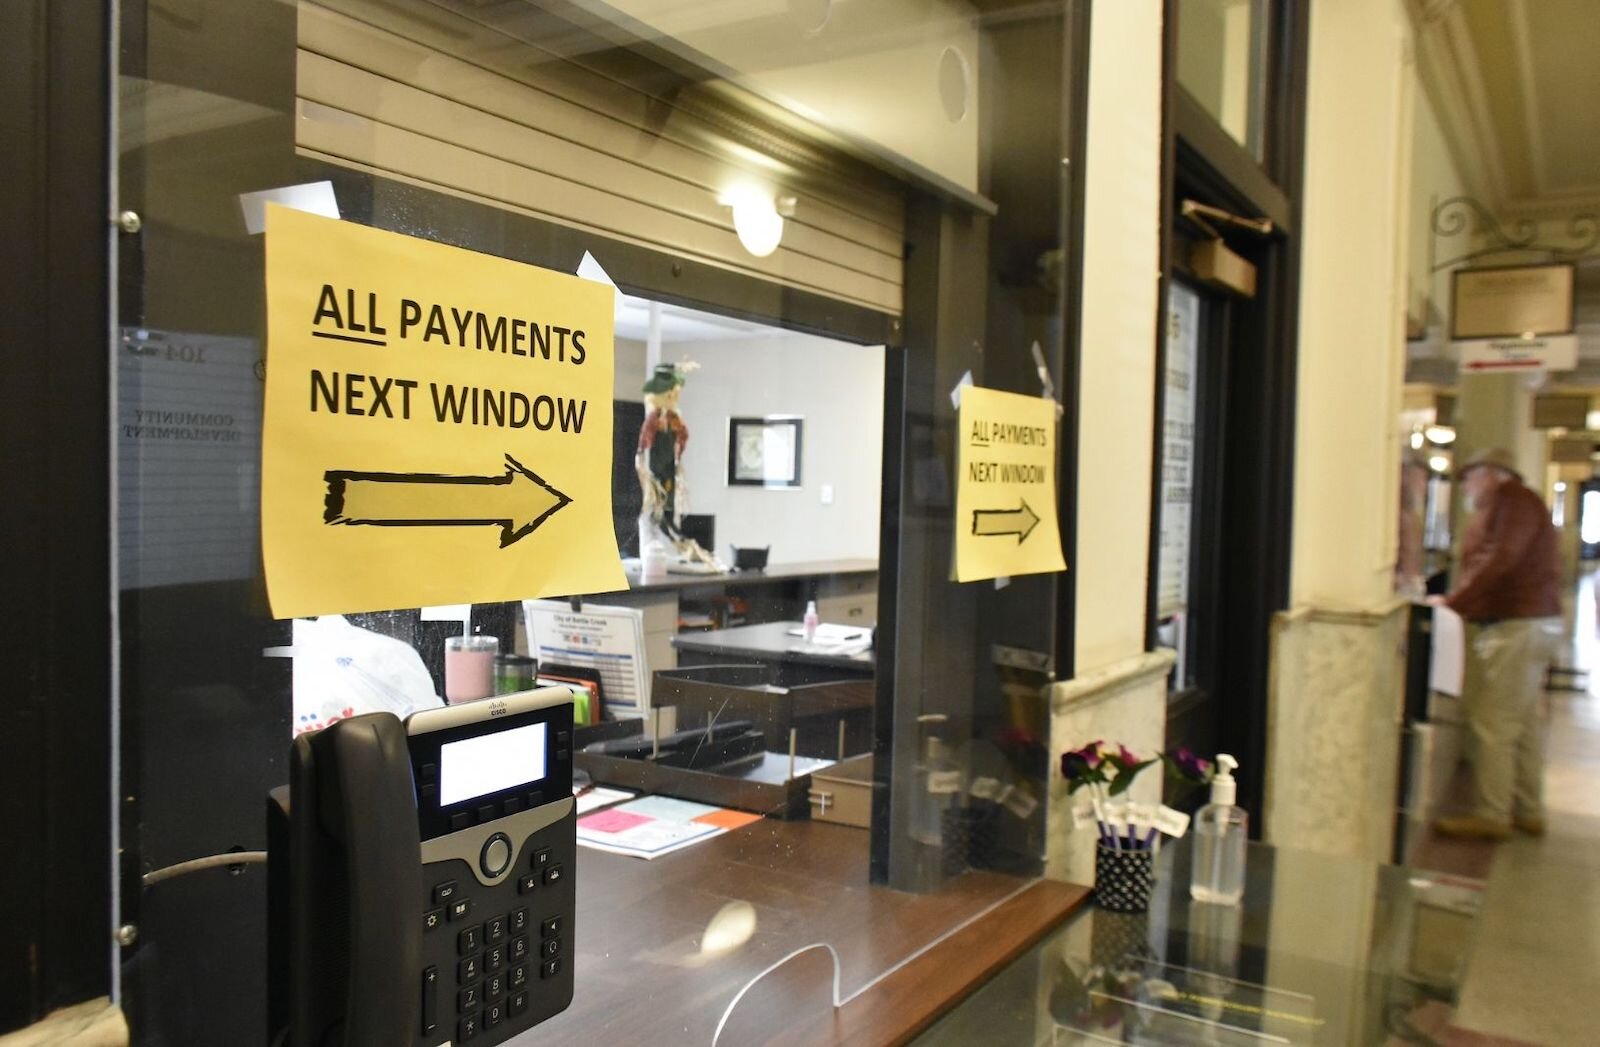 Plexiglass separates employees and members of the public making payments at Battle Creek’s City Hall.